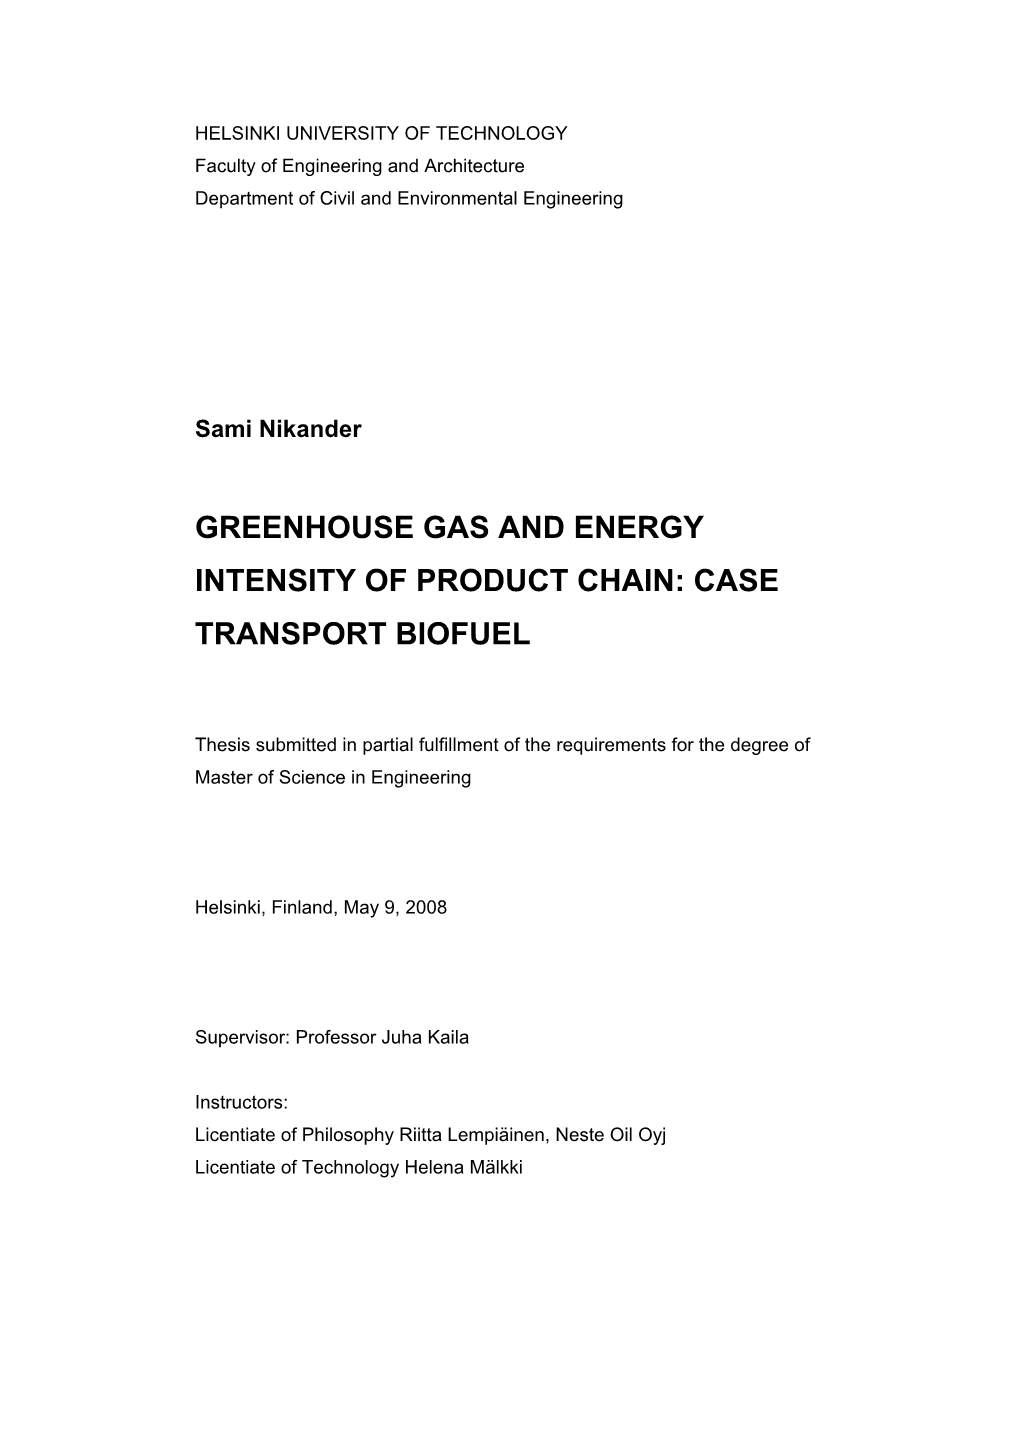 Greenhouse Gas and Energy Intensity of Product Chain: Case Transport Biofuel